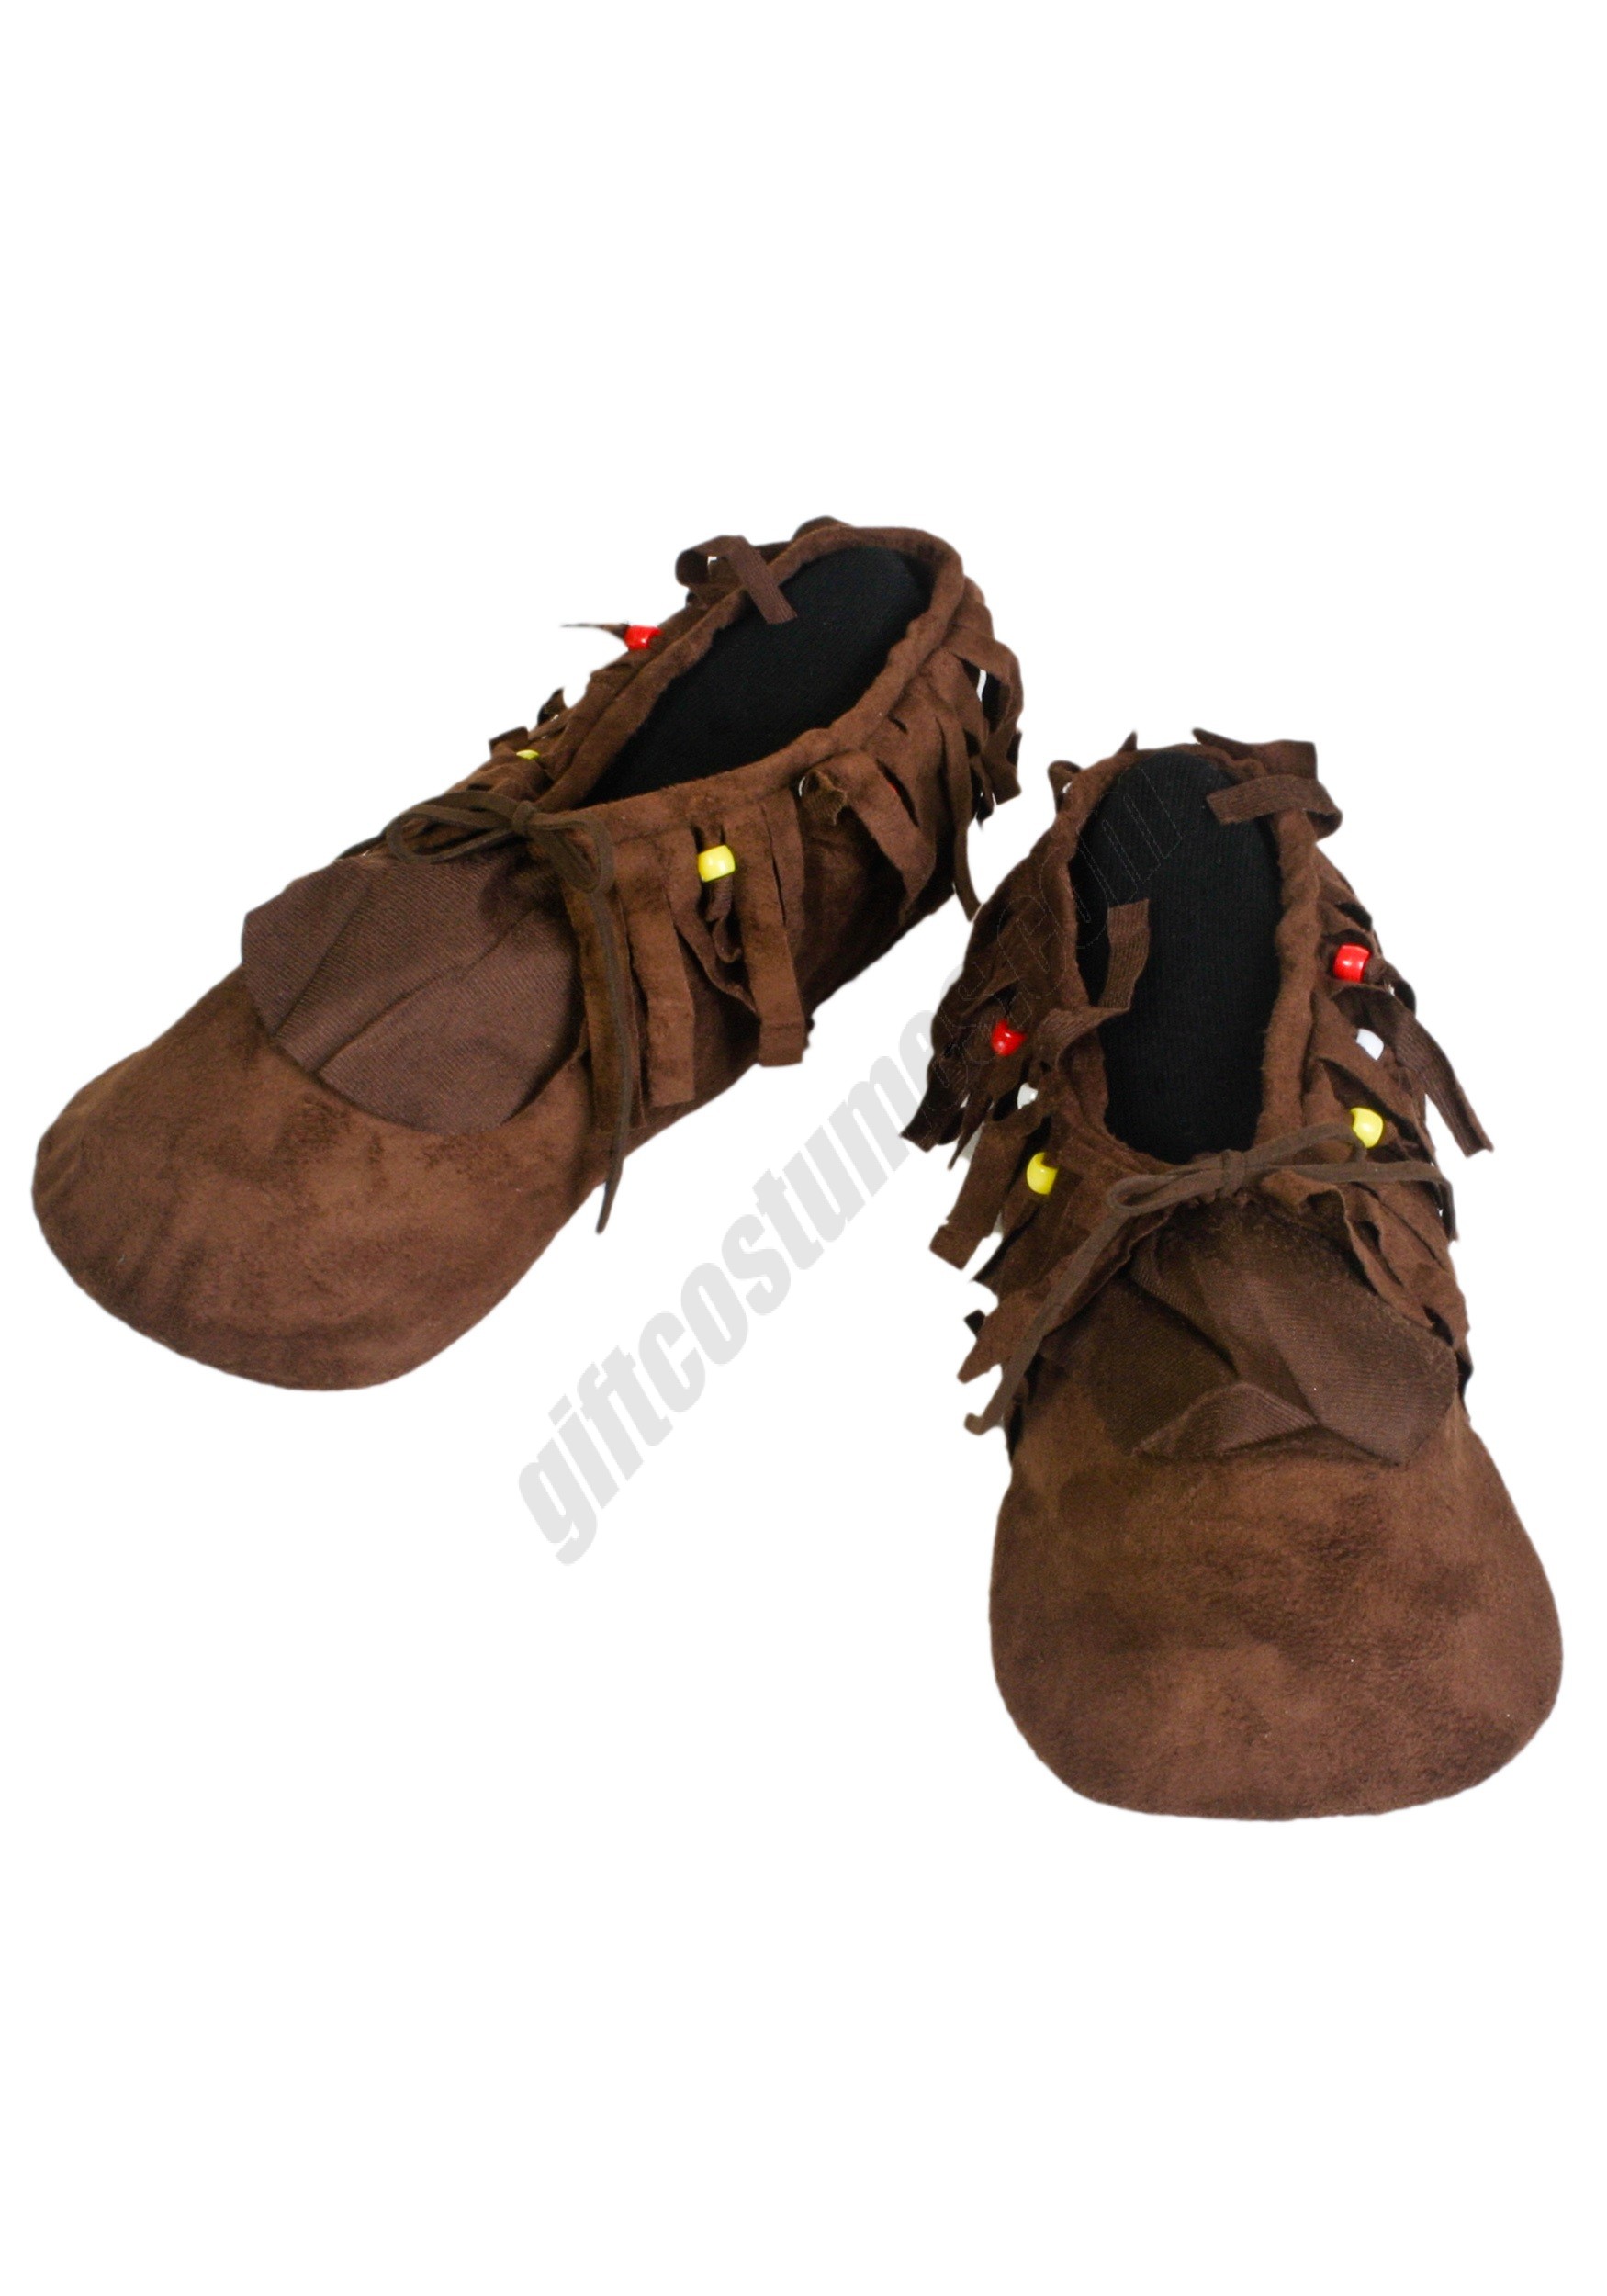 Womens Hippie Moccasins Promotions - Womens Hippie Moccasins Promotions